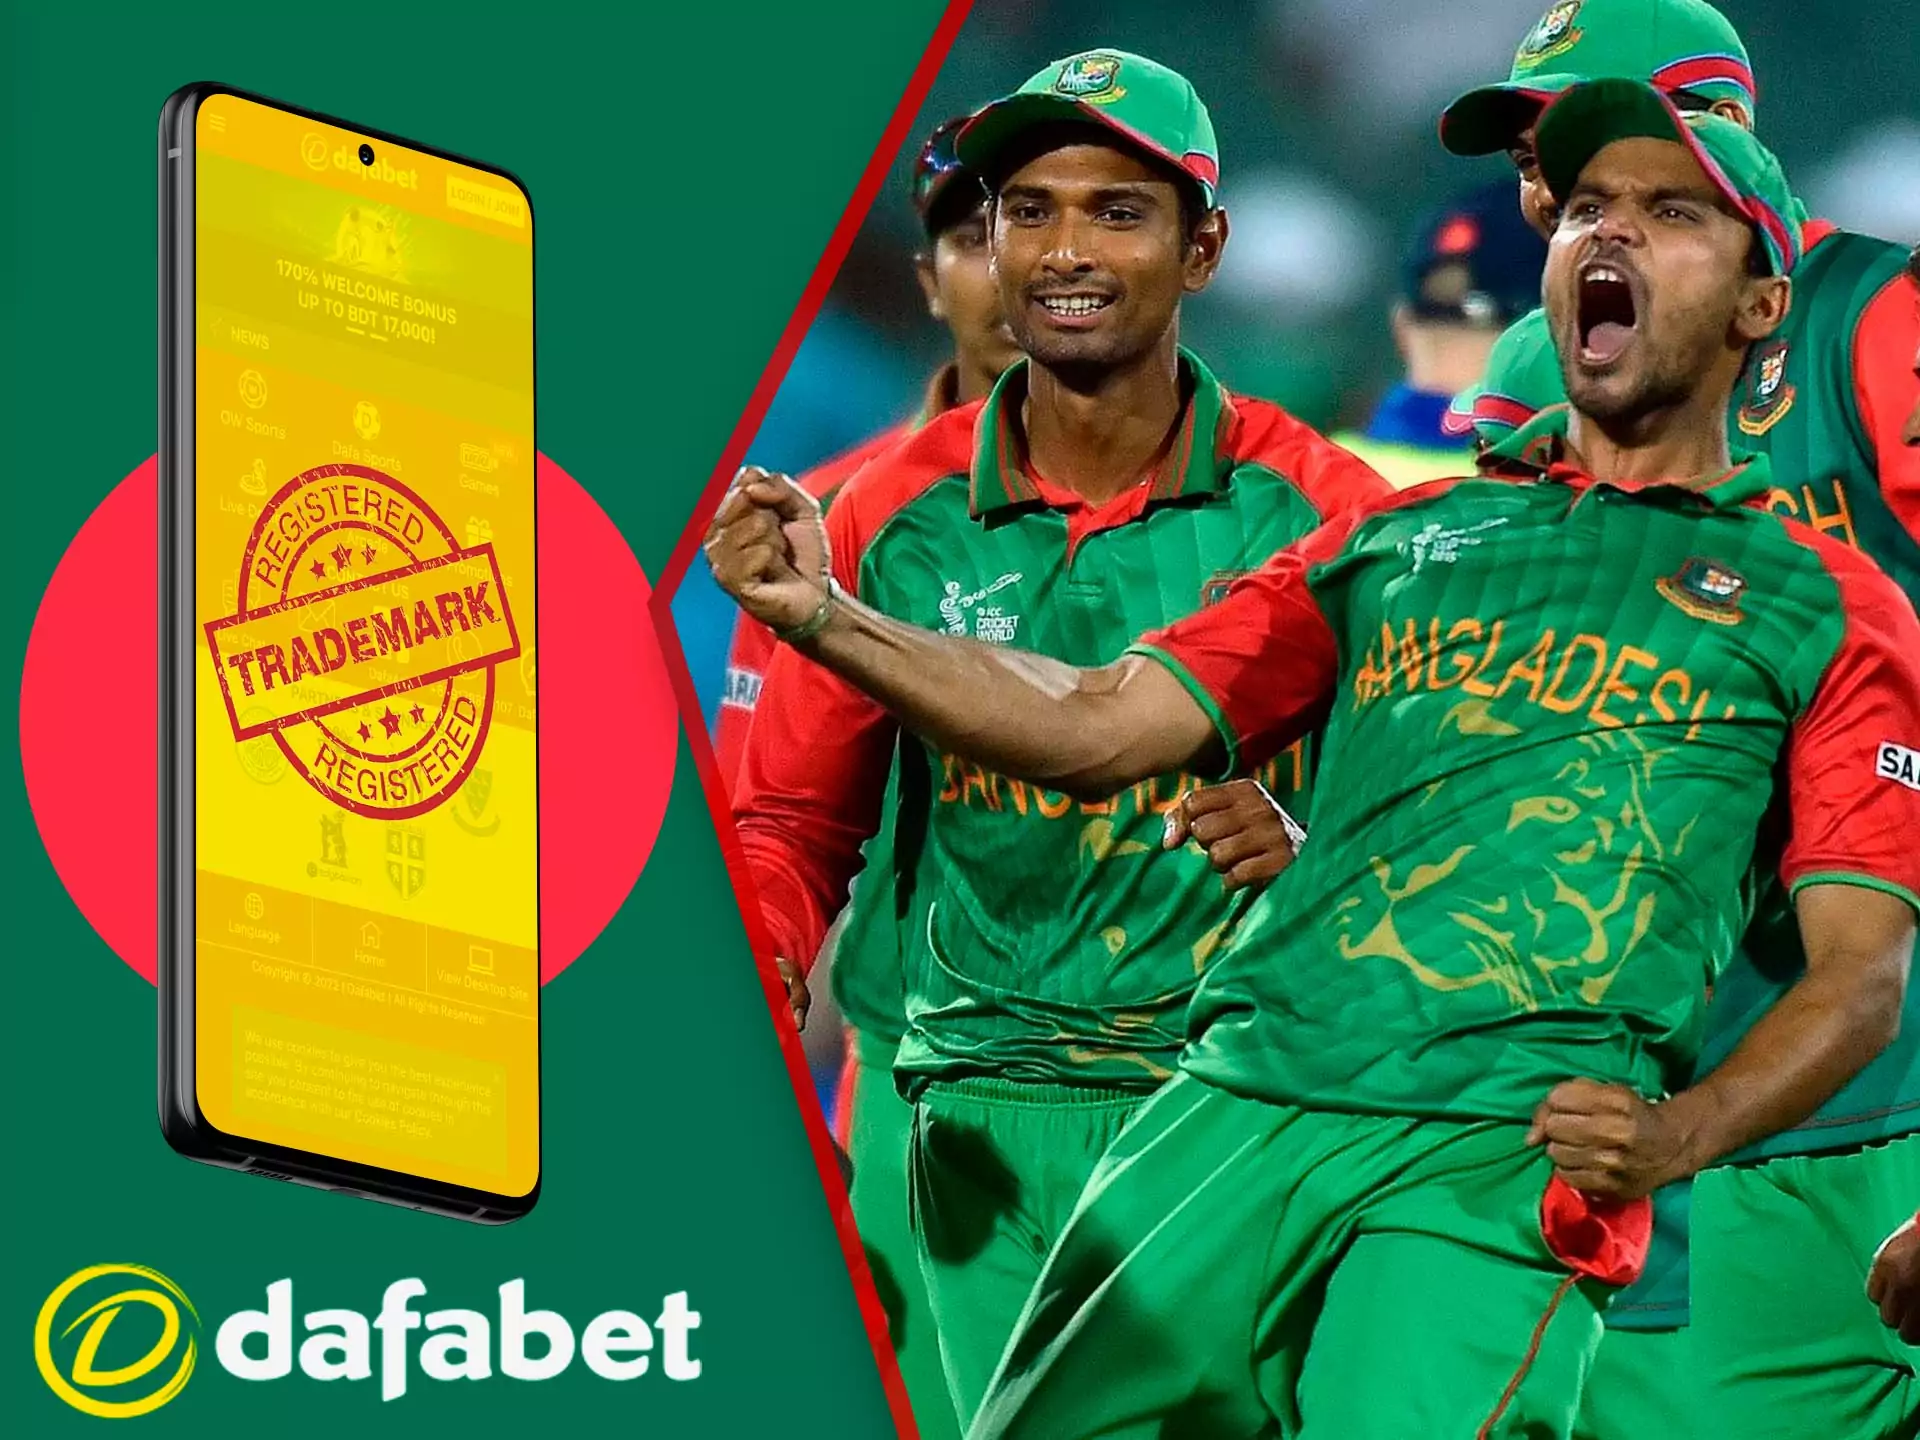 Dafabet is a completely safe bookmaker officially registered in Bangladash.